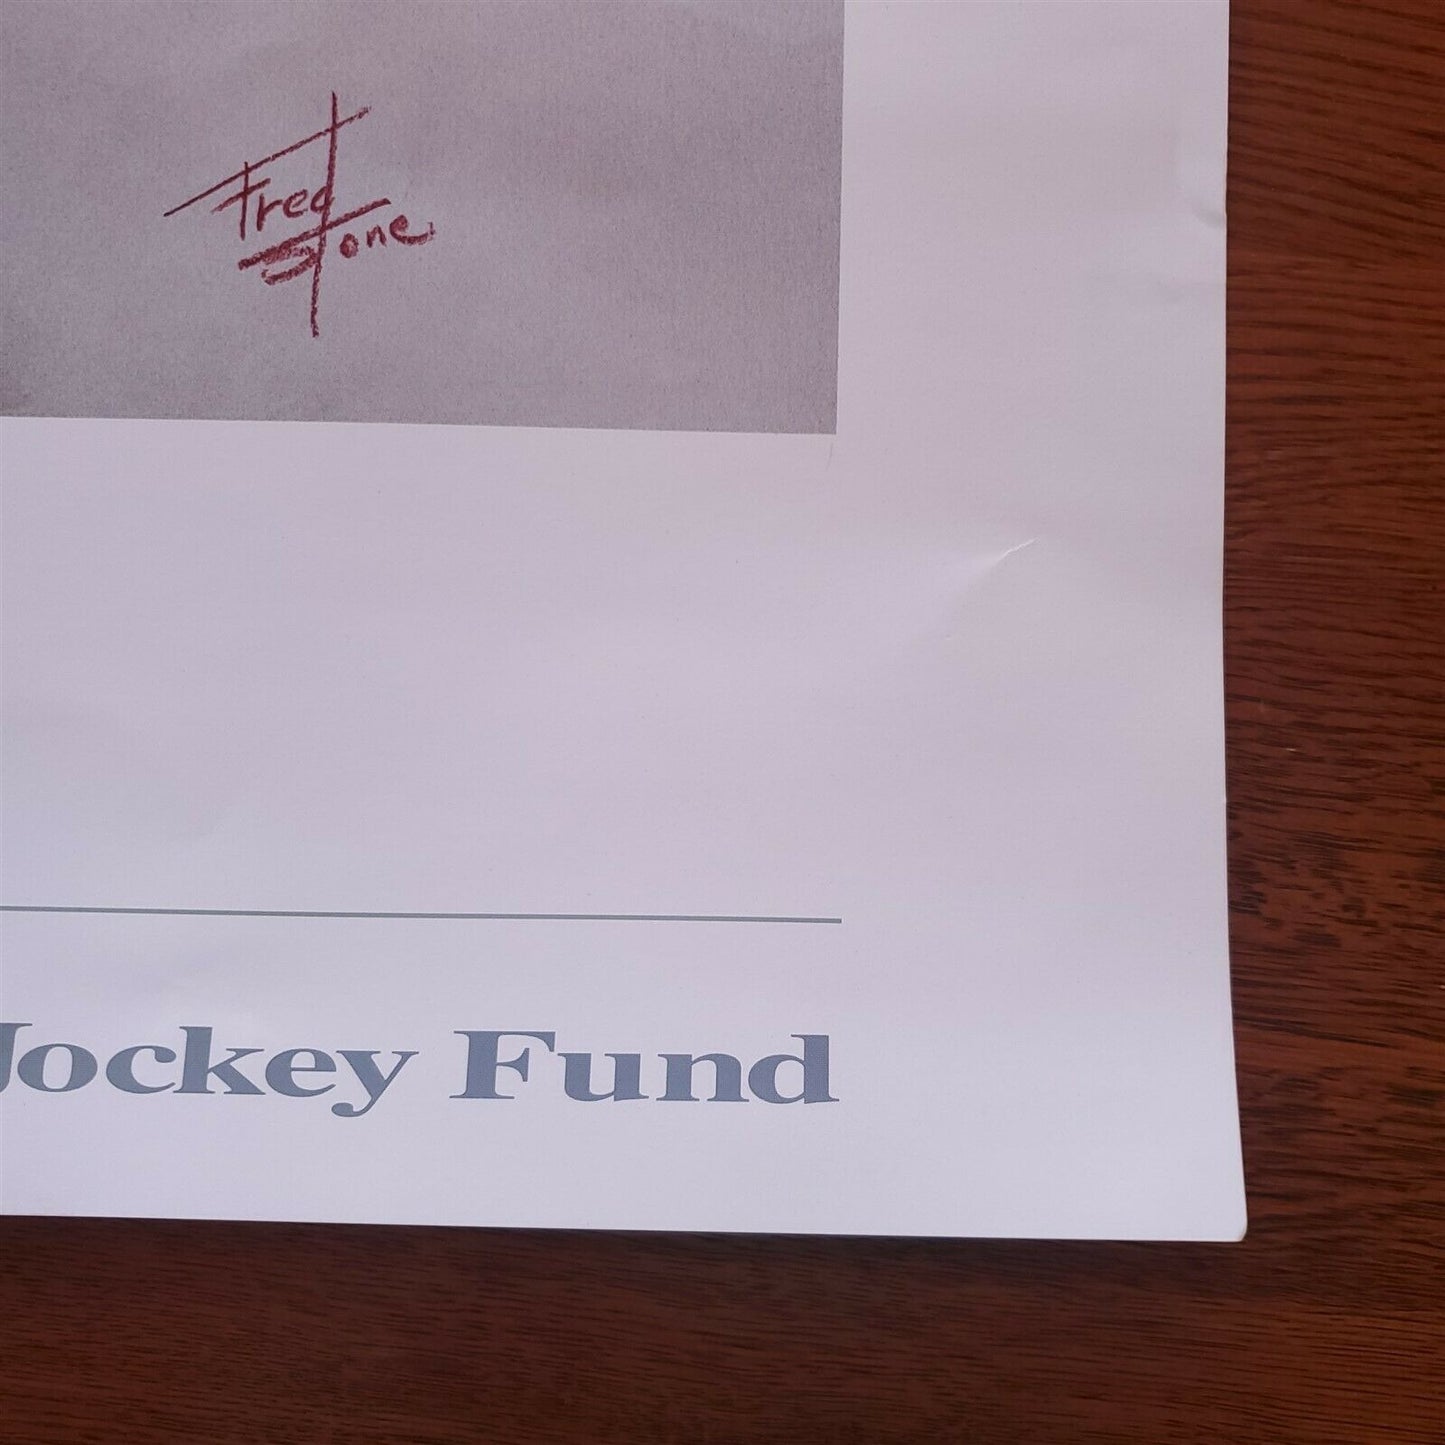 Fred Stone One, Two, & Three Race Horses Don MacBeth Memorial Jockey Fund Signed